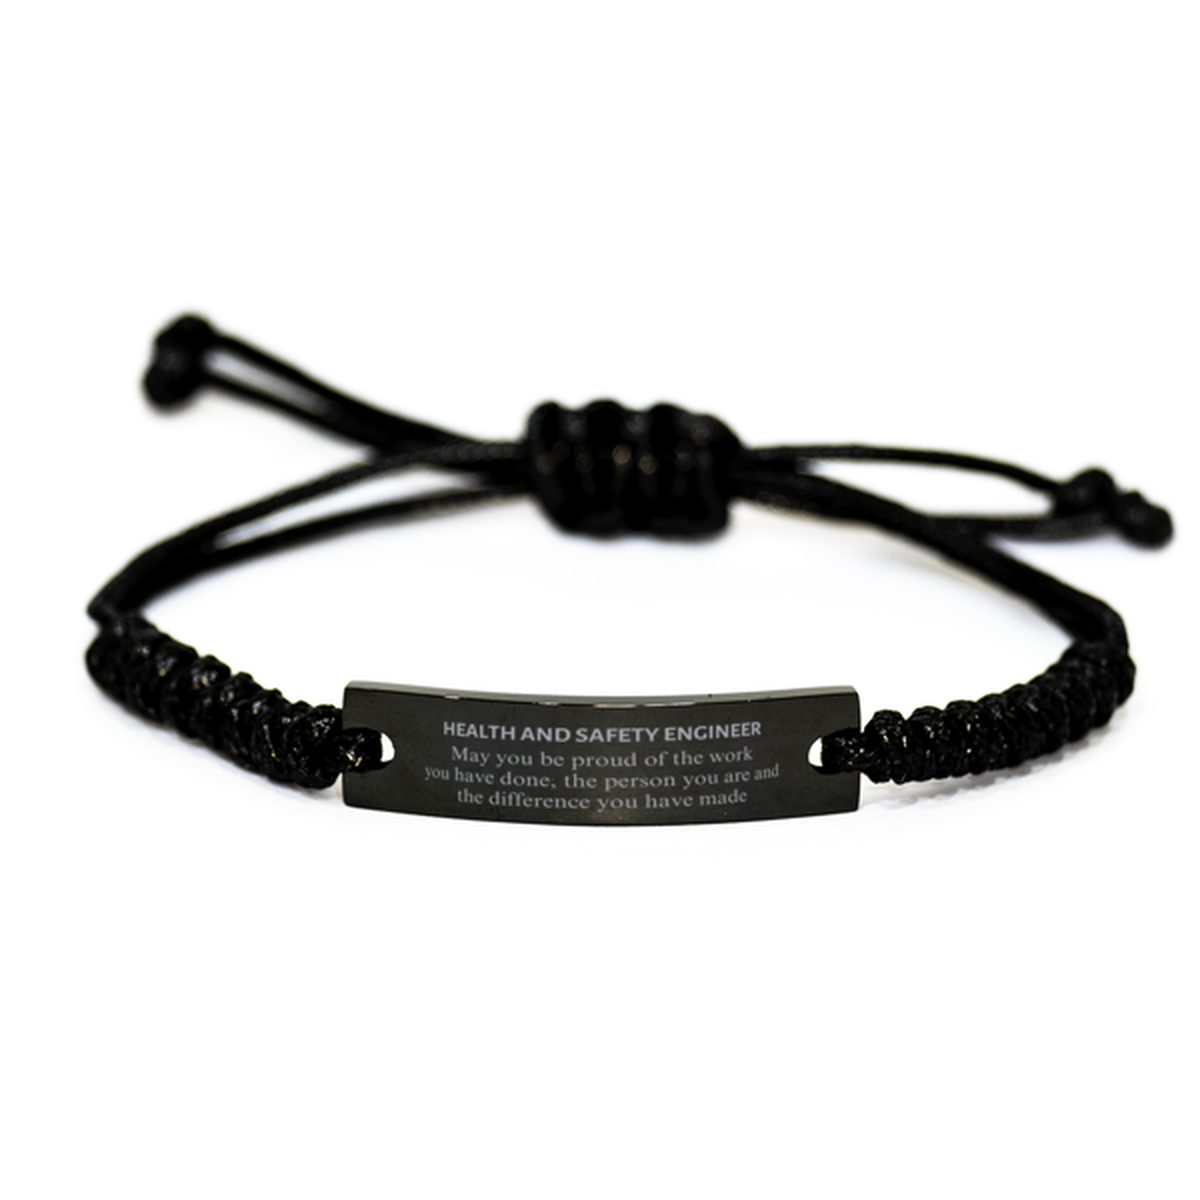 Health and Safety Engineer May you be proud of the work you have done, Retirement Health and Safety Engineer Black Rope Bracelet for Colleague Appreciation Gifts Amazing for Health and Safety Engineer